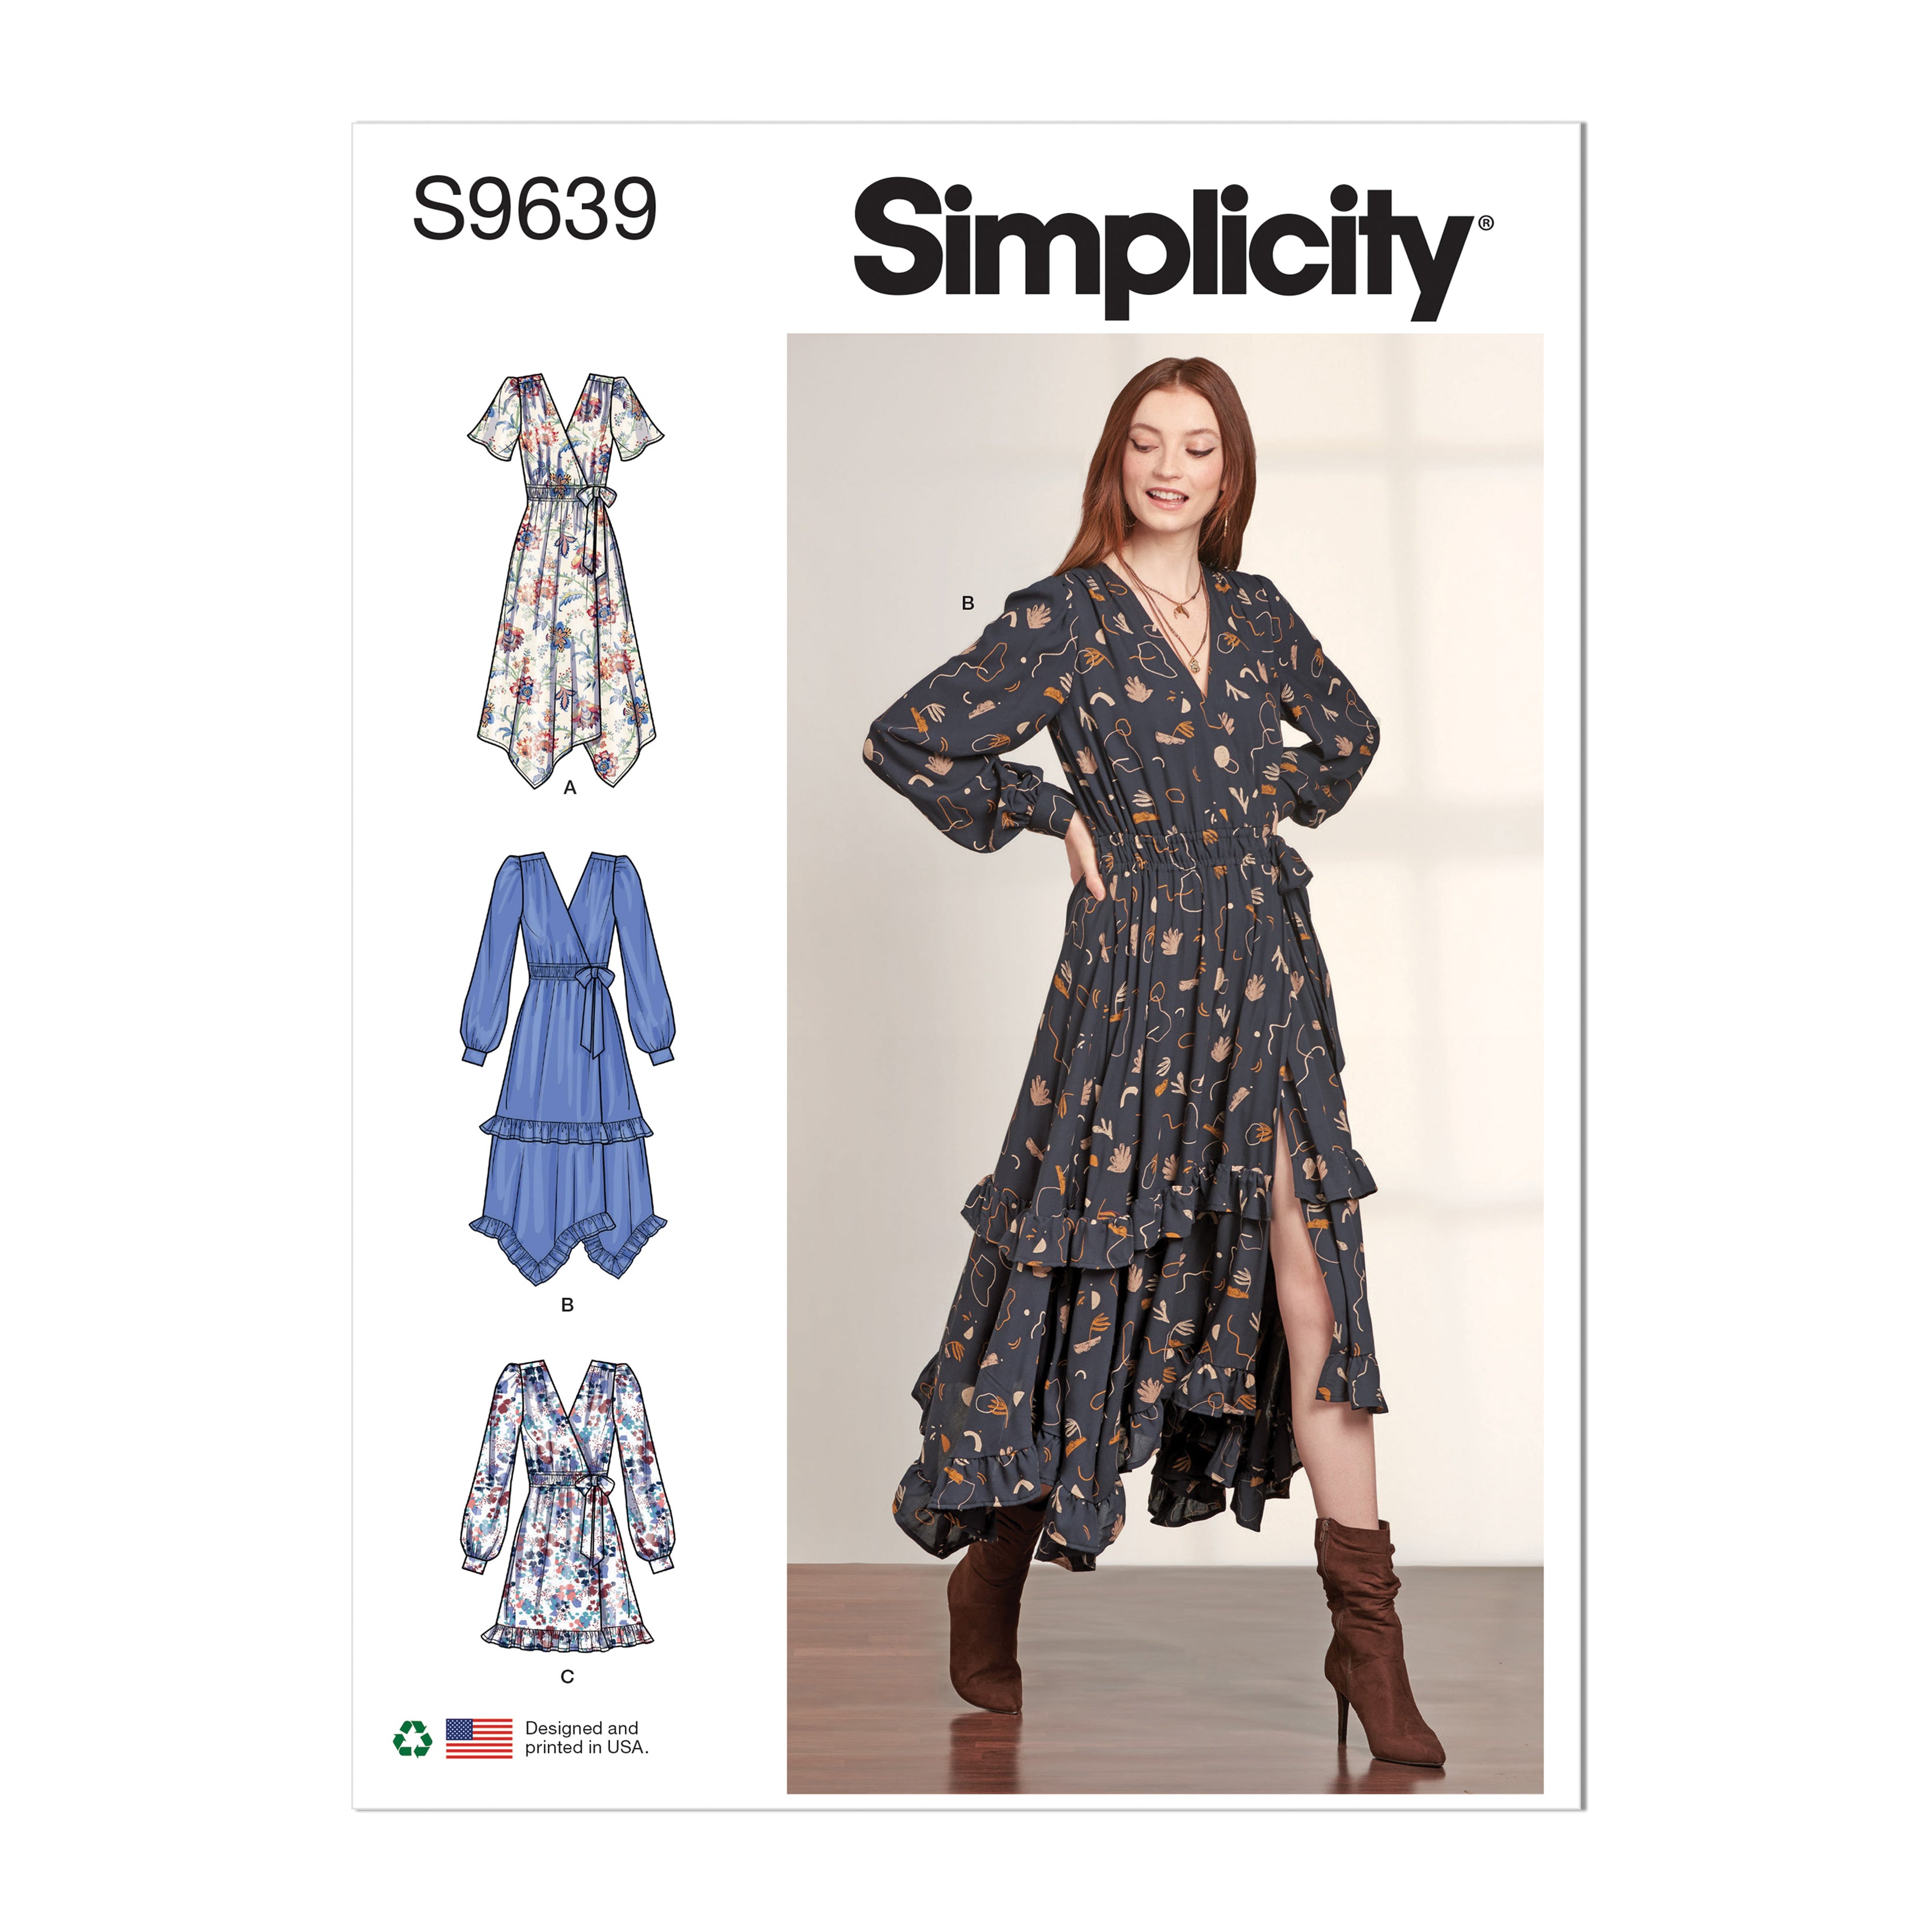 Simplicity sewing pattern 9639 Misses' Midi Wrap Dress from Jaycotts Sewing Supplies